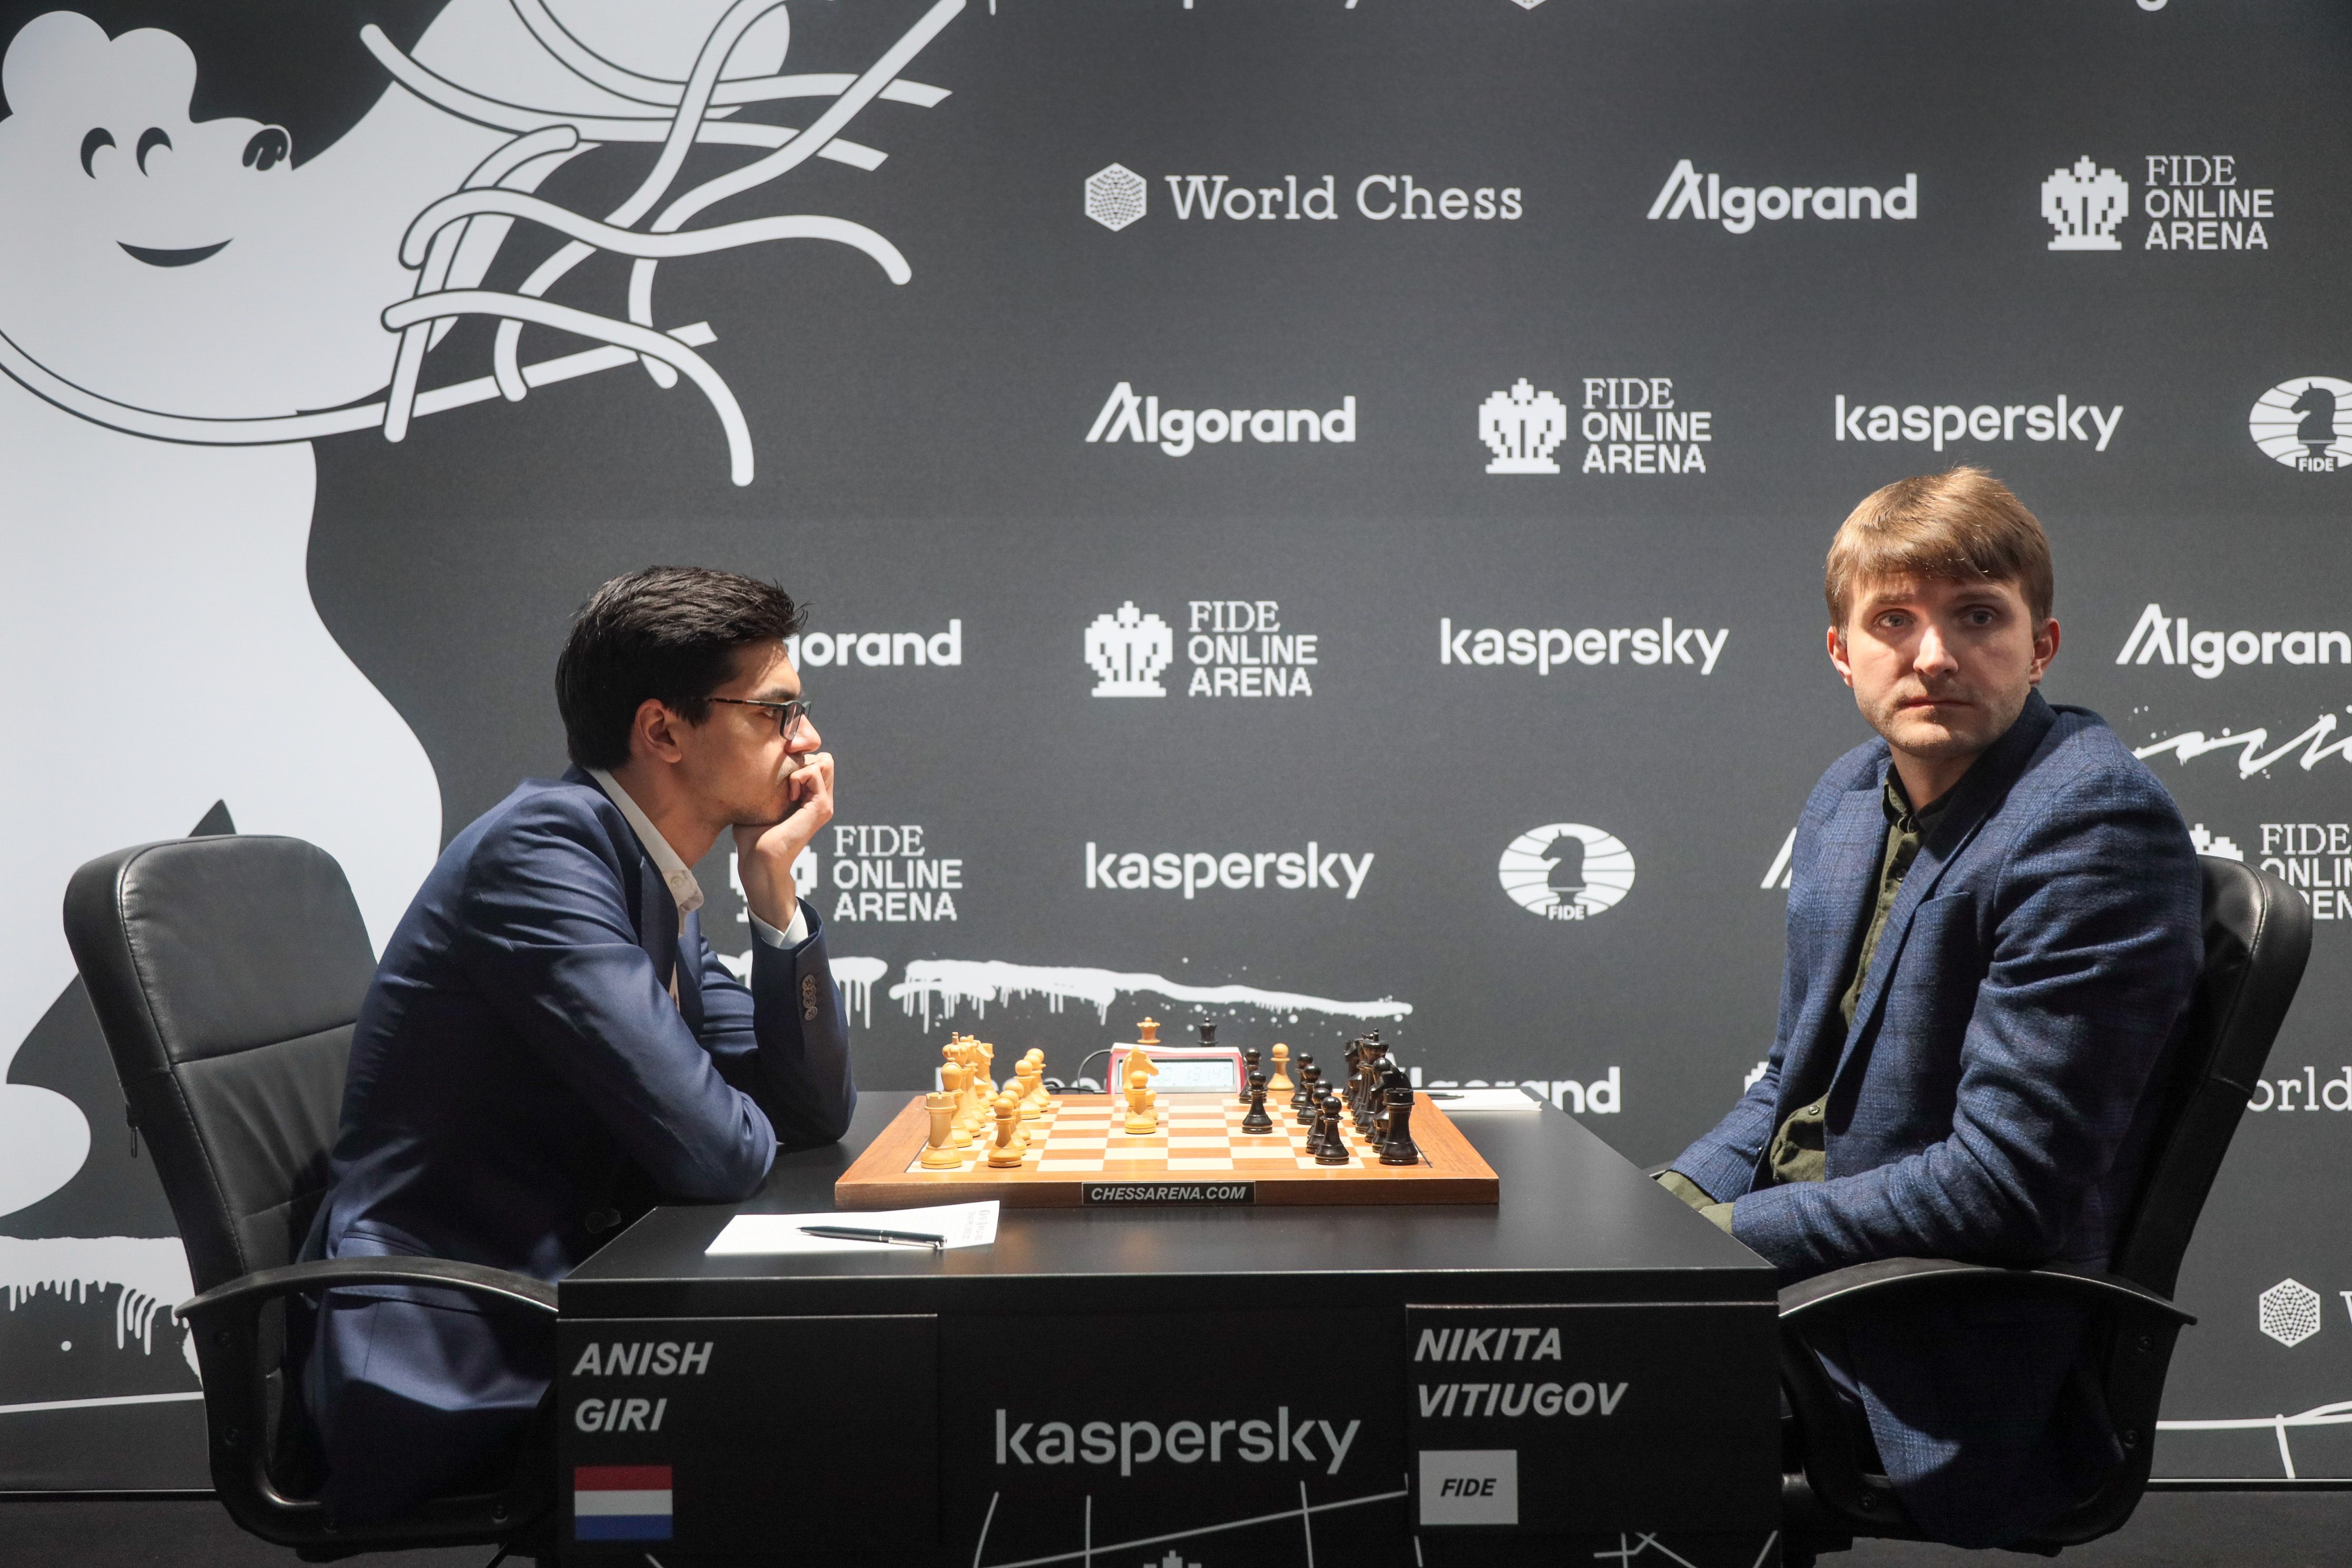 3RD-FIDE-GRAND-PRIX-2022 - Play Chess with Friends